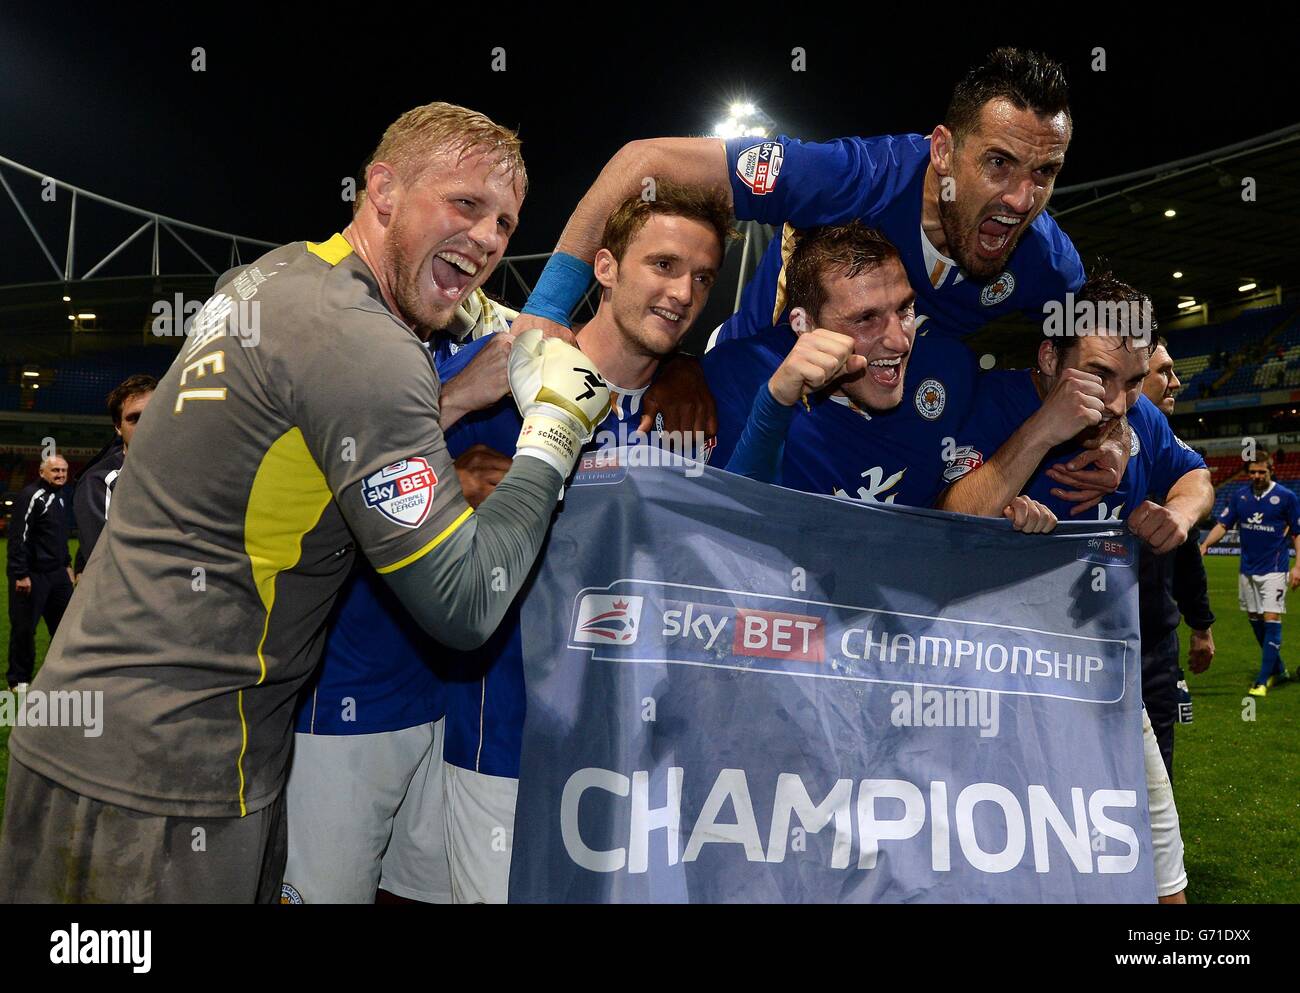 Leicester City players celebrate after winning the Sky Bet Championship,  during the Sky Bet Championship match at the Reebok Stadium, Bolton Stock  Photo - Alamy